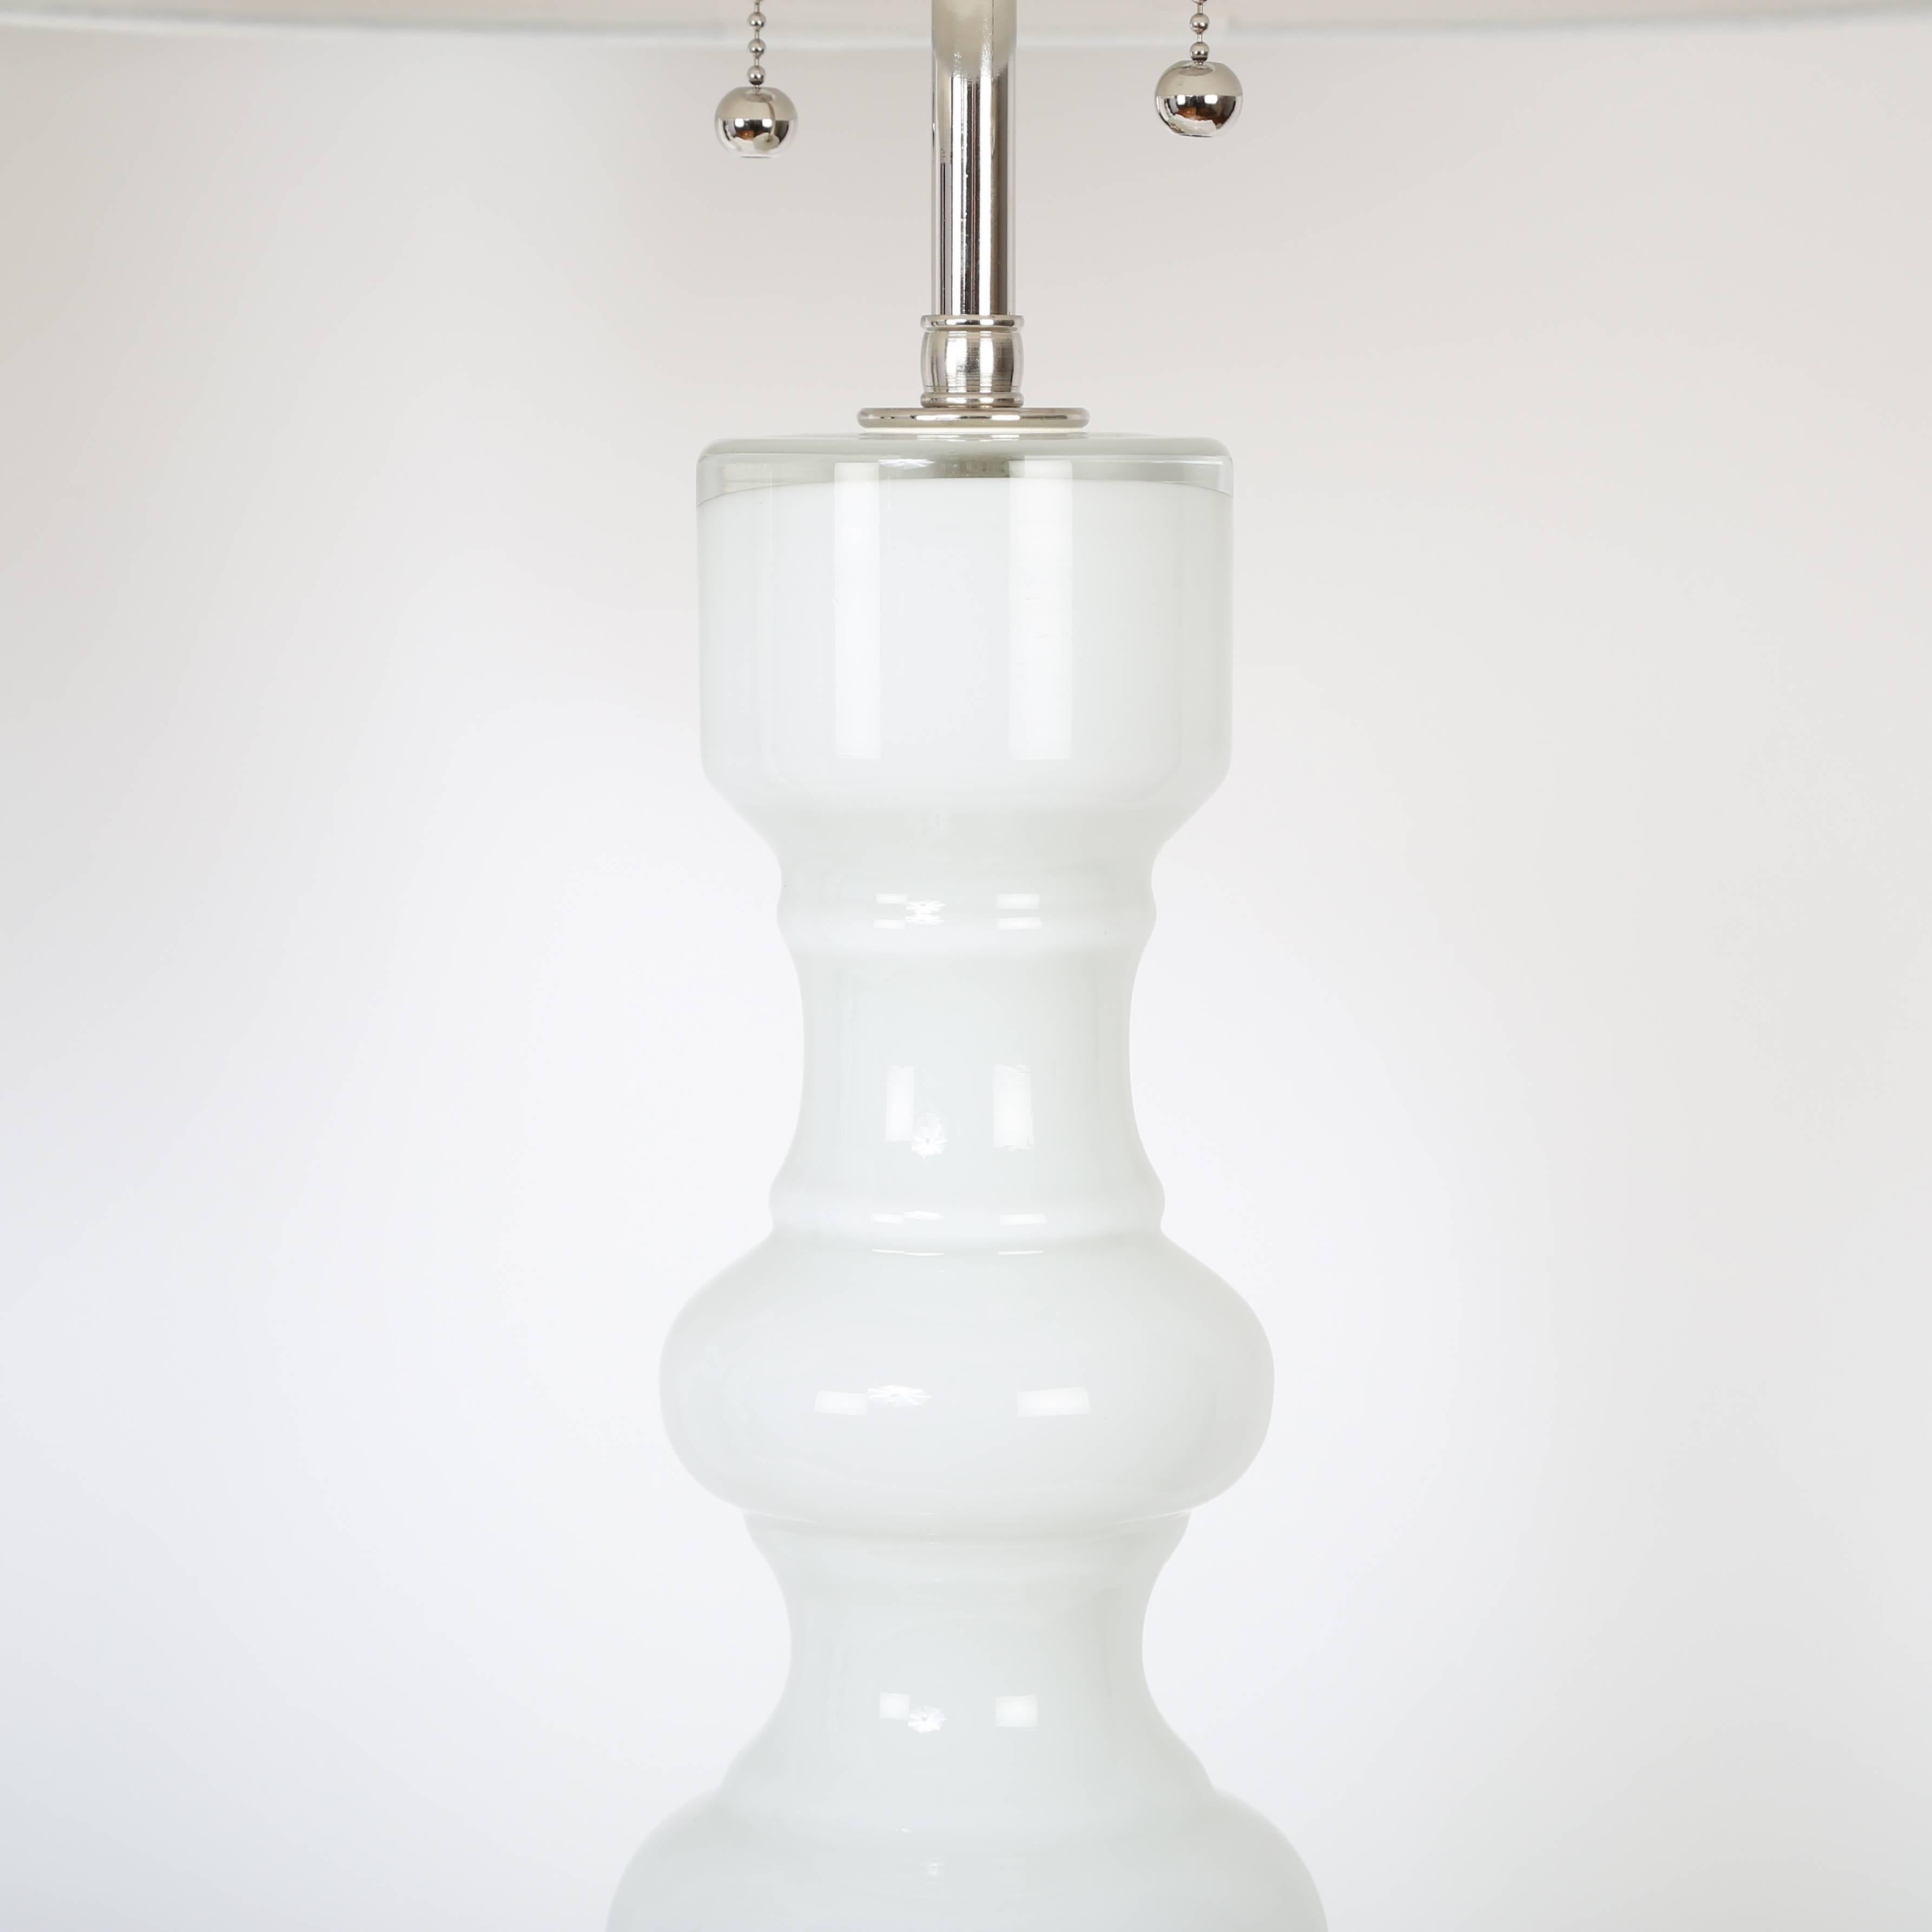 Pair of shapely and tall 1960s white glass table lamps by the Lindshammar glass studio in Sweden. Rewired with new polished-nickel hardware featuring two sockets operated by pull chains. Shades not included. Measures: Overall with shades shown